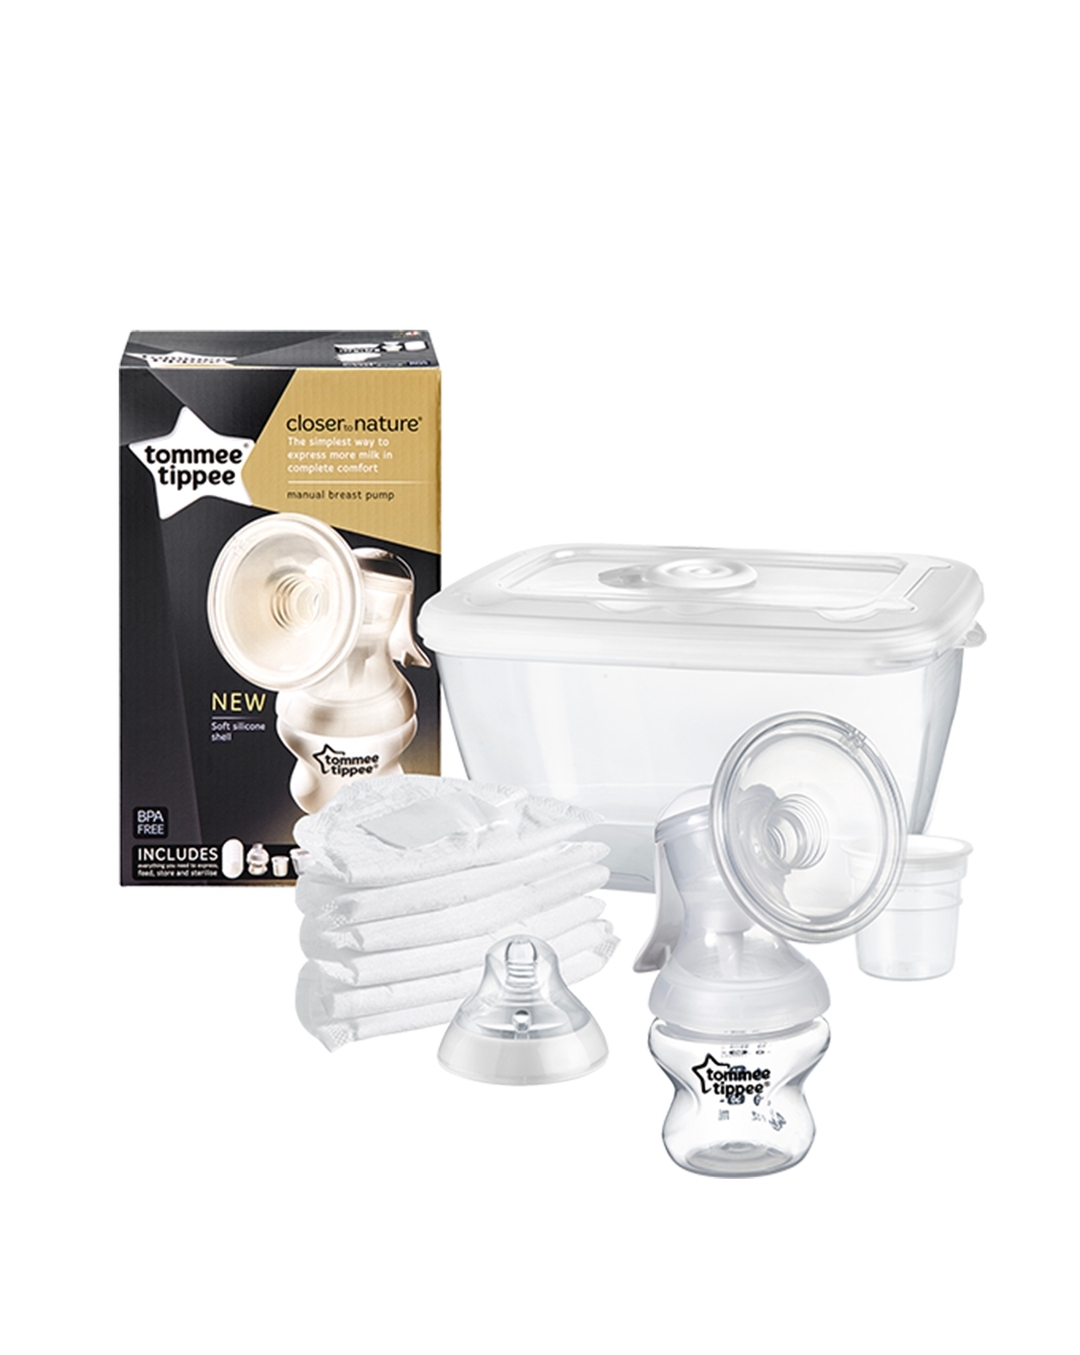 Buy the Tommee Tippee Manual Breast Pump from Babies-R-Us Online